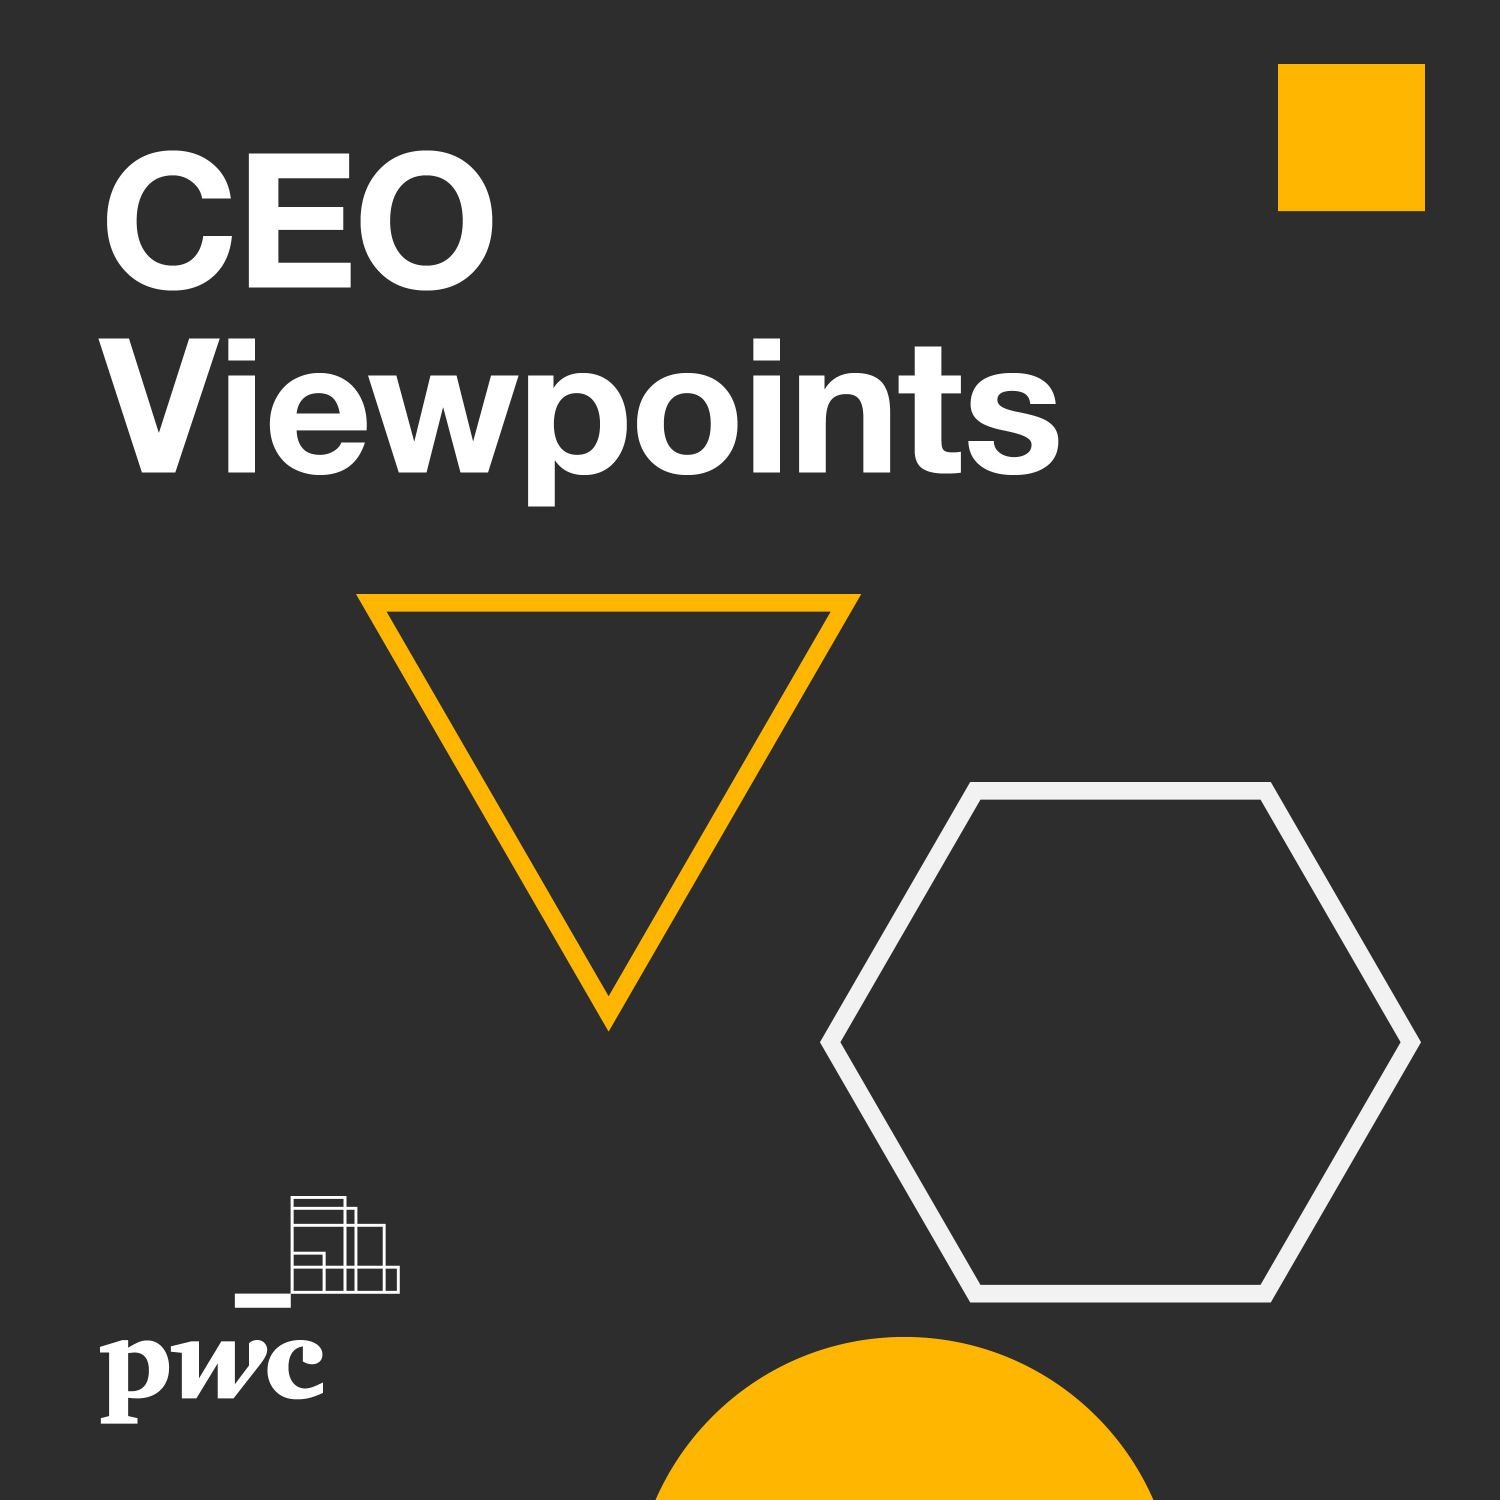 CEO Viewpoints Episode 1: Driving business transformation through ESG